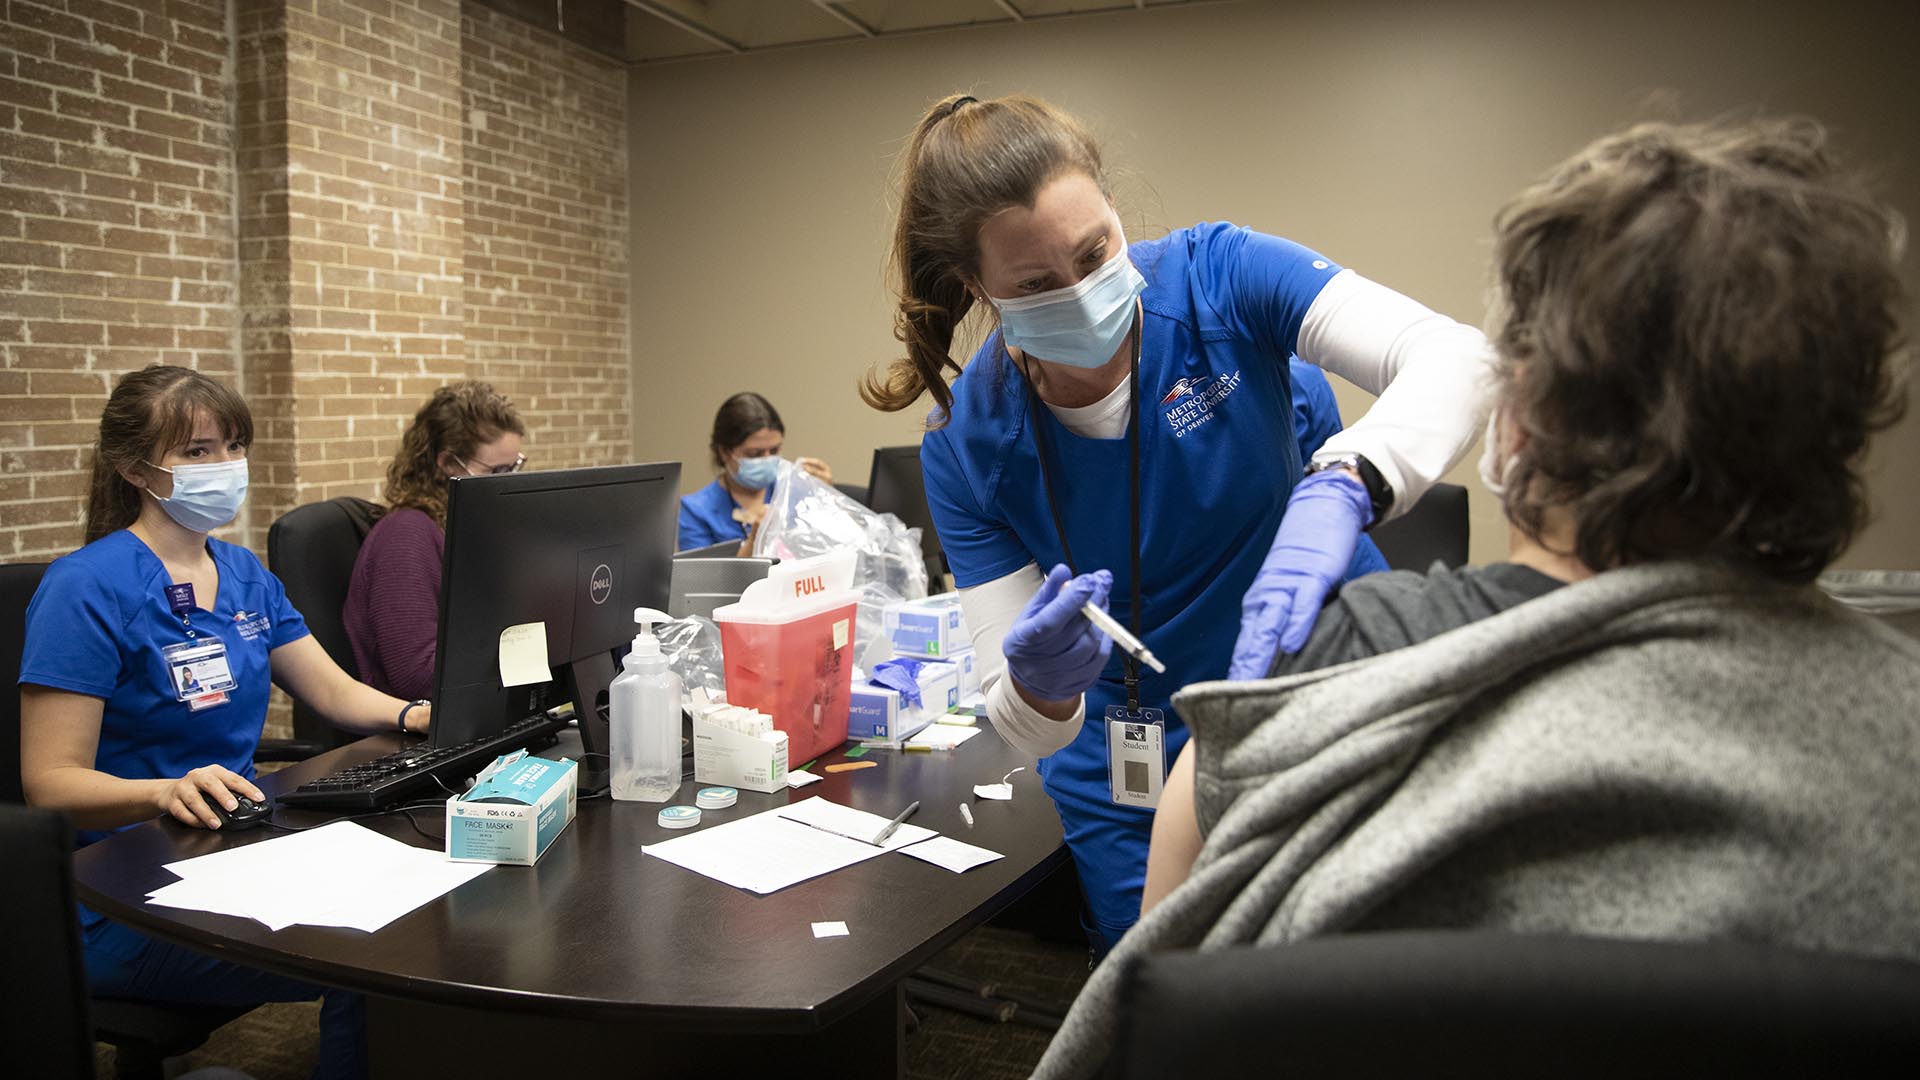 MSU Denver nursing students give Covid vaccinations as part of their clinical rotation at the Colorado Coalition for the Homeless in Denver.